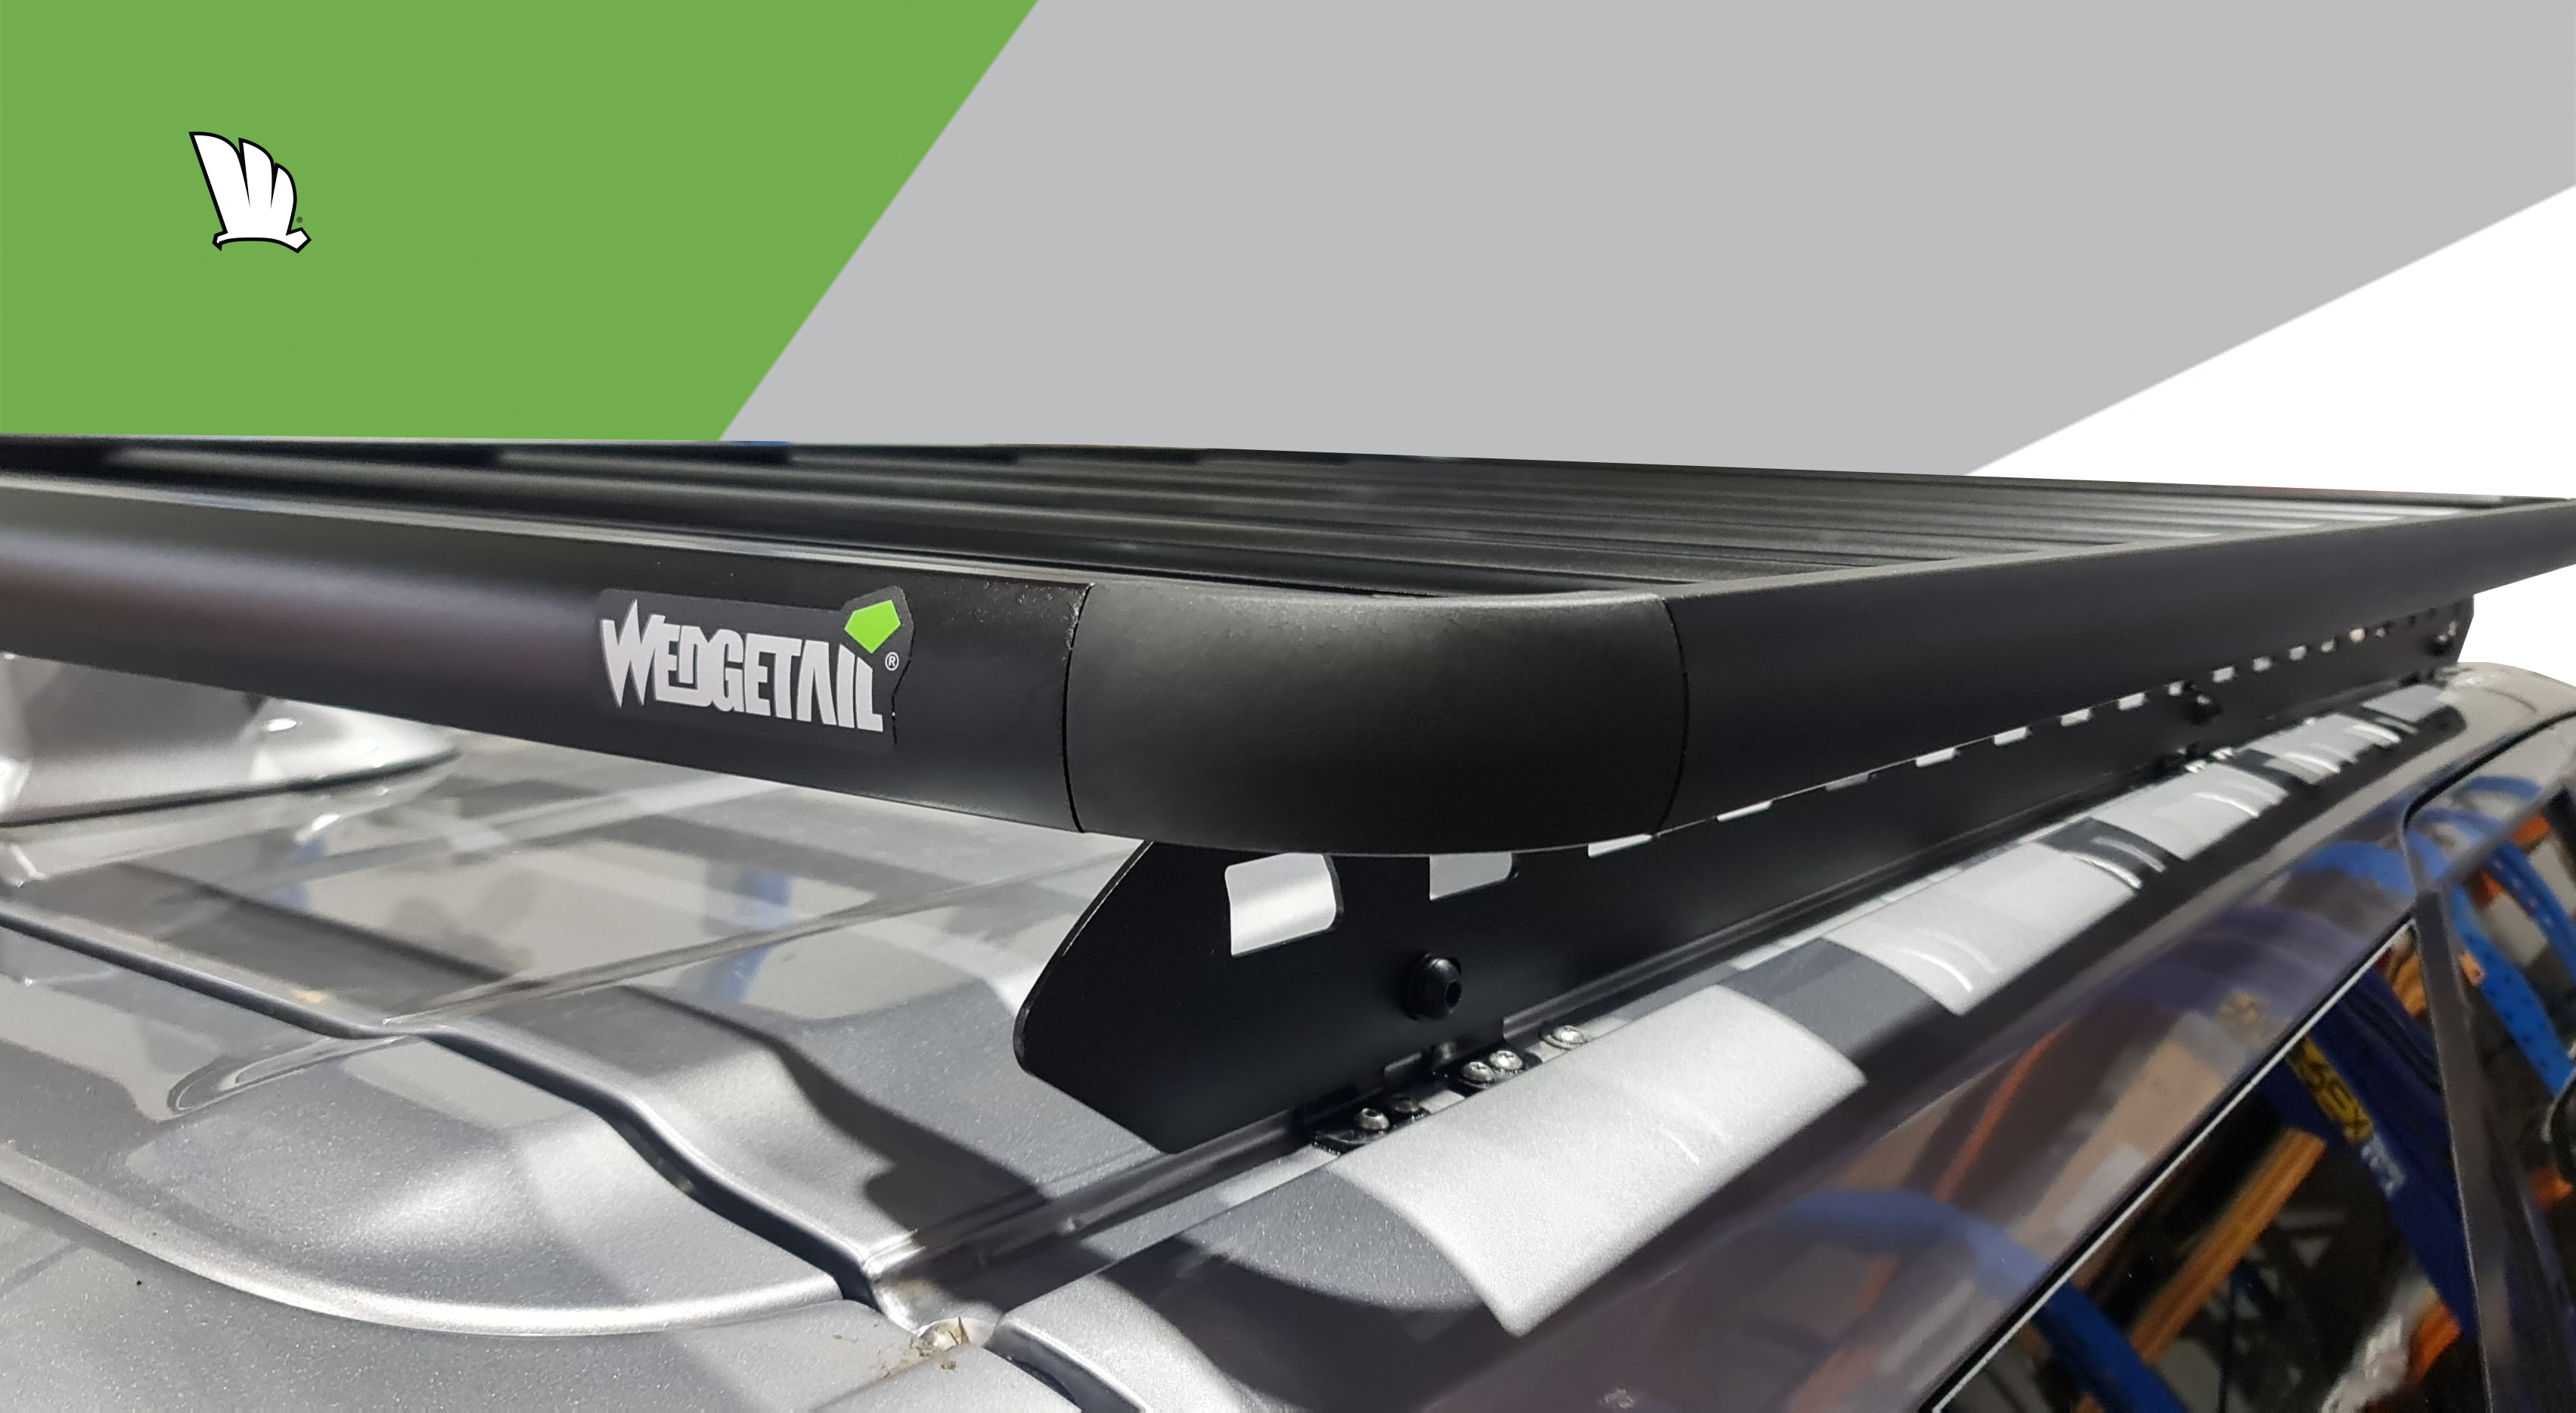 Front view of the Wedgetail rack on the Fortuner showing the owner installed light bar and our standard wind deflector, the mounting points for the one piece mounting rails and the platform on top with seven cross bars to give superior strength.